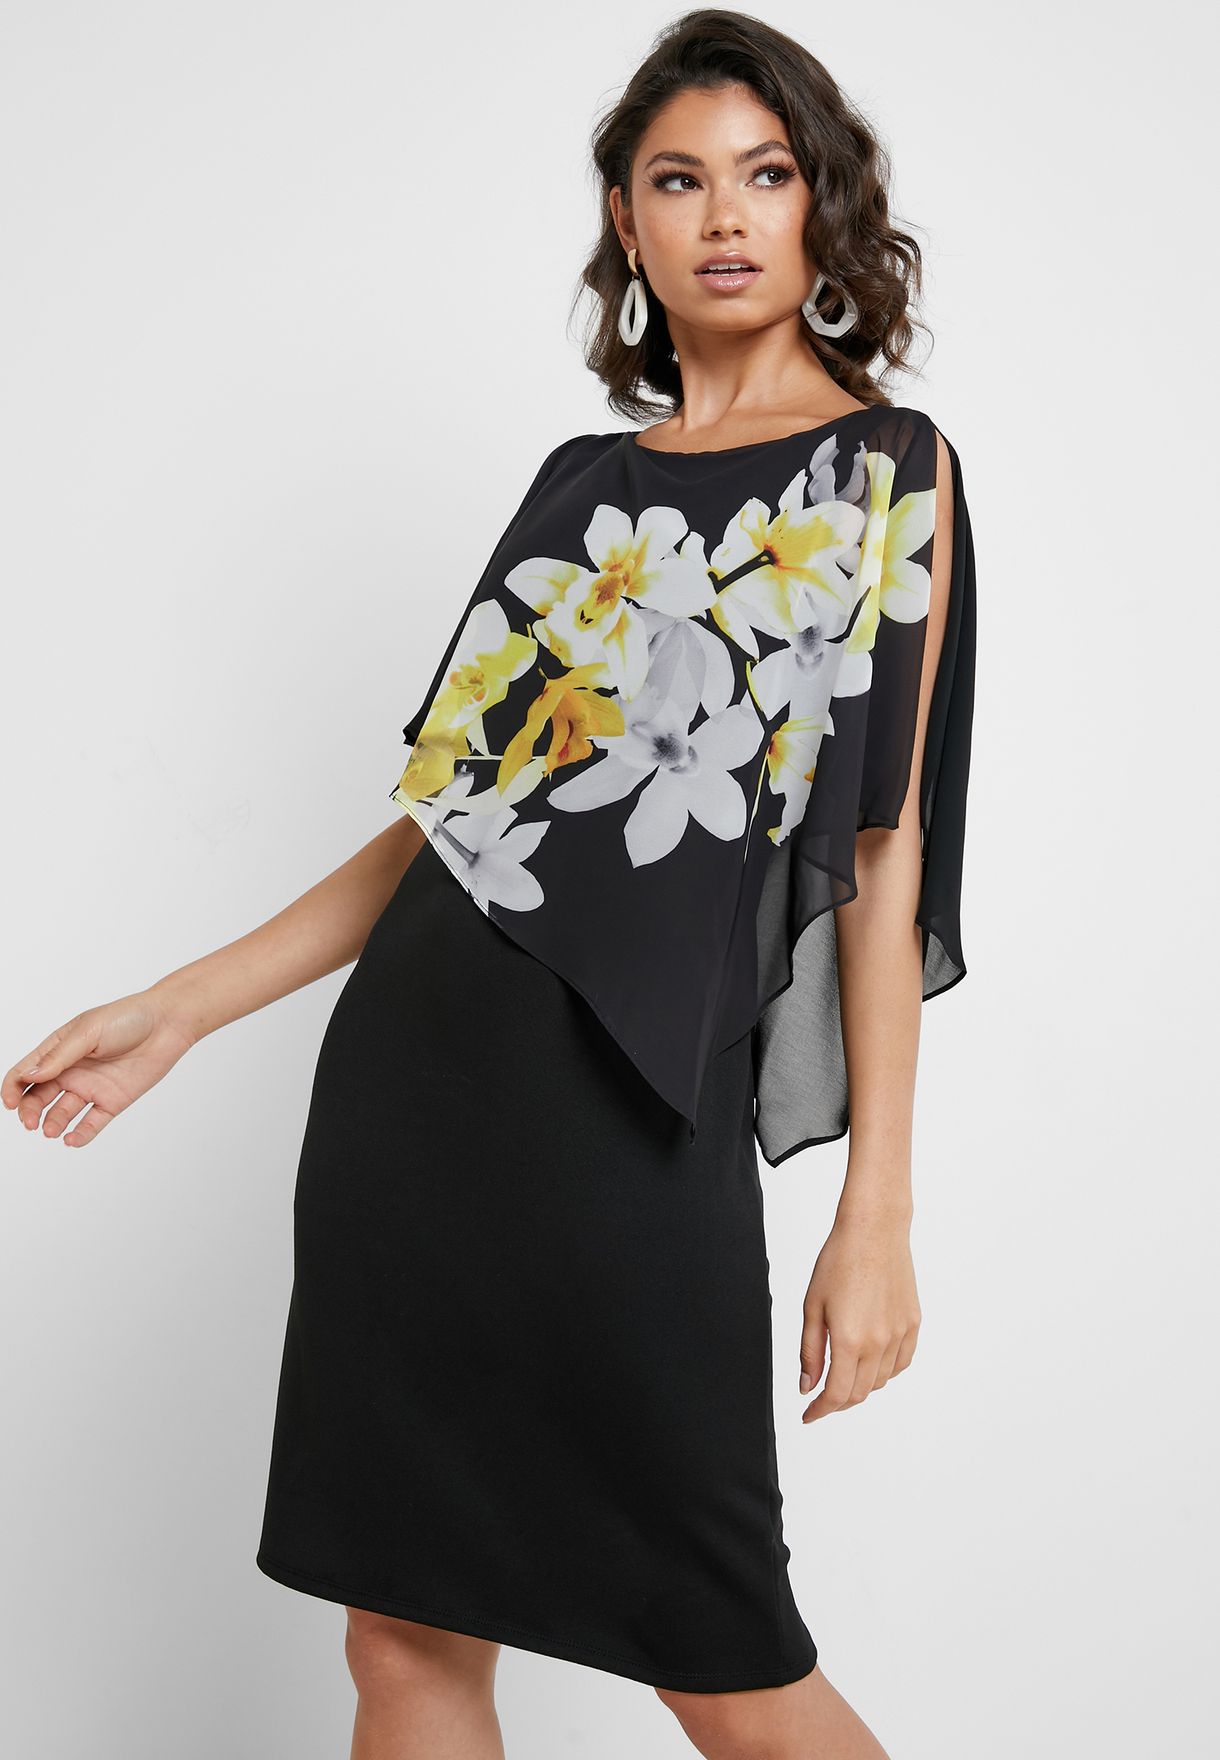 black dress with floral overlay